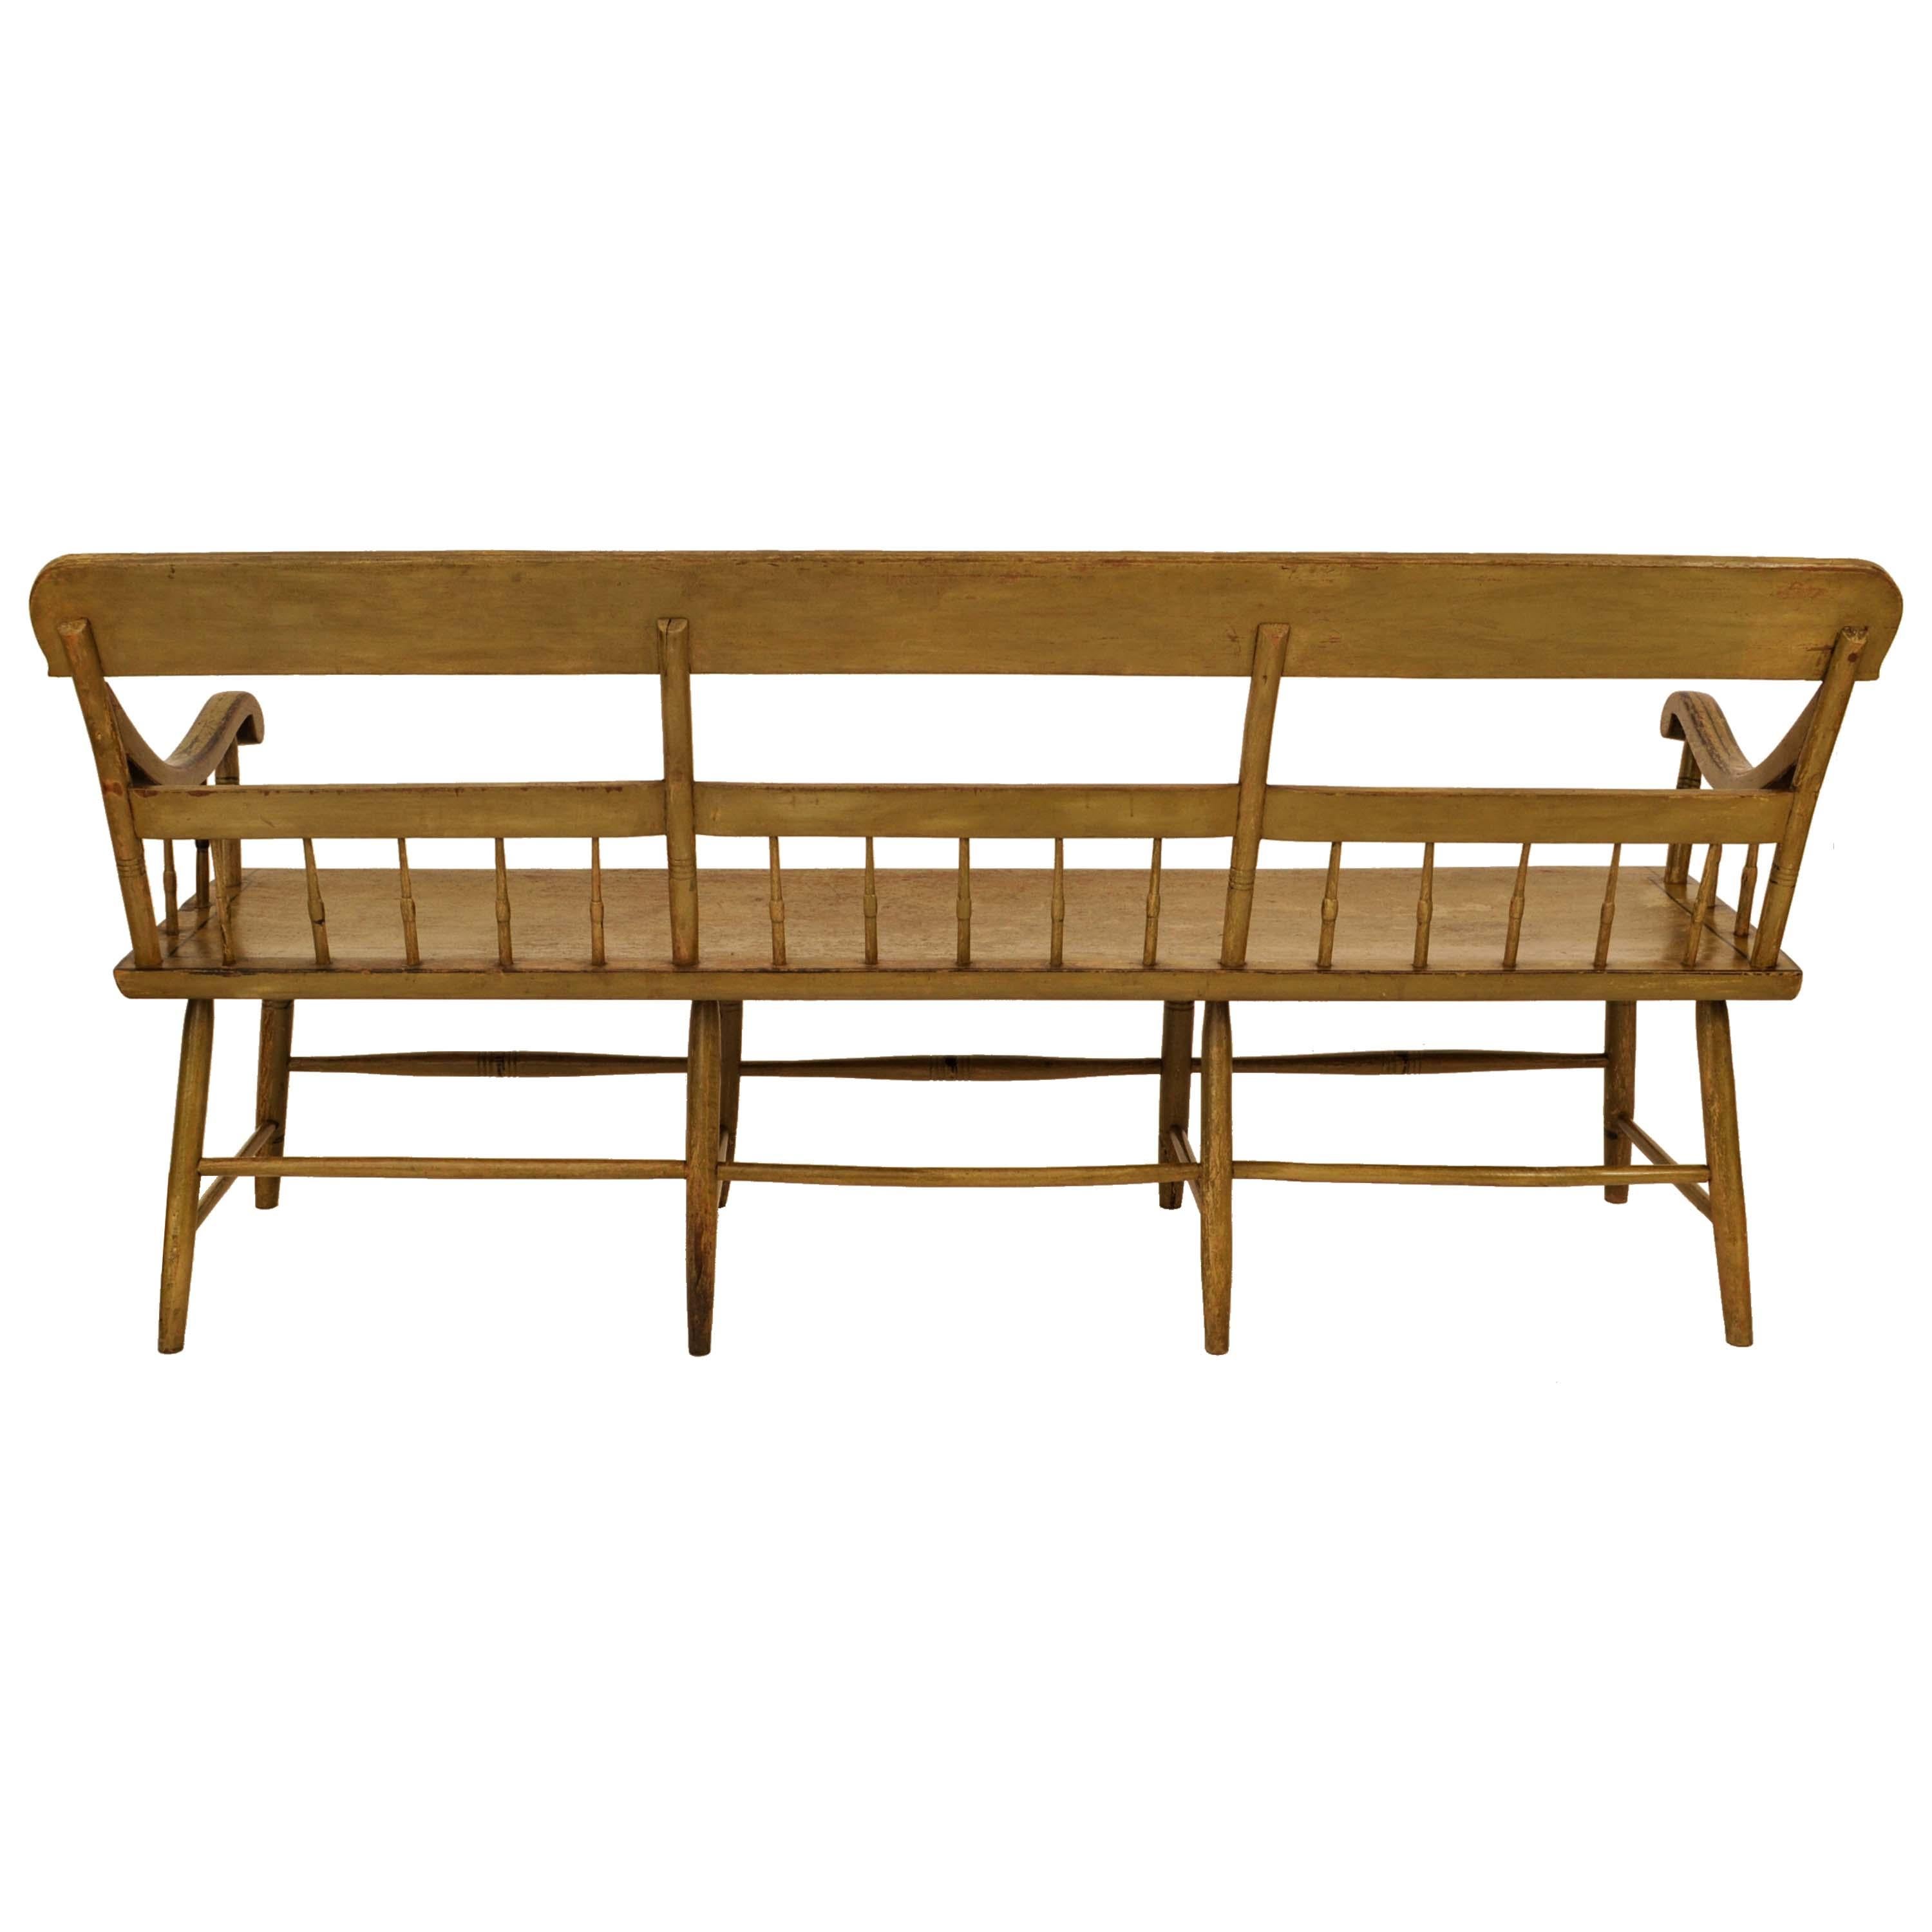 Pine Antique American Federal Baltimore Painted Spindled Windsor Bench Settee 1820 For Sale